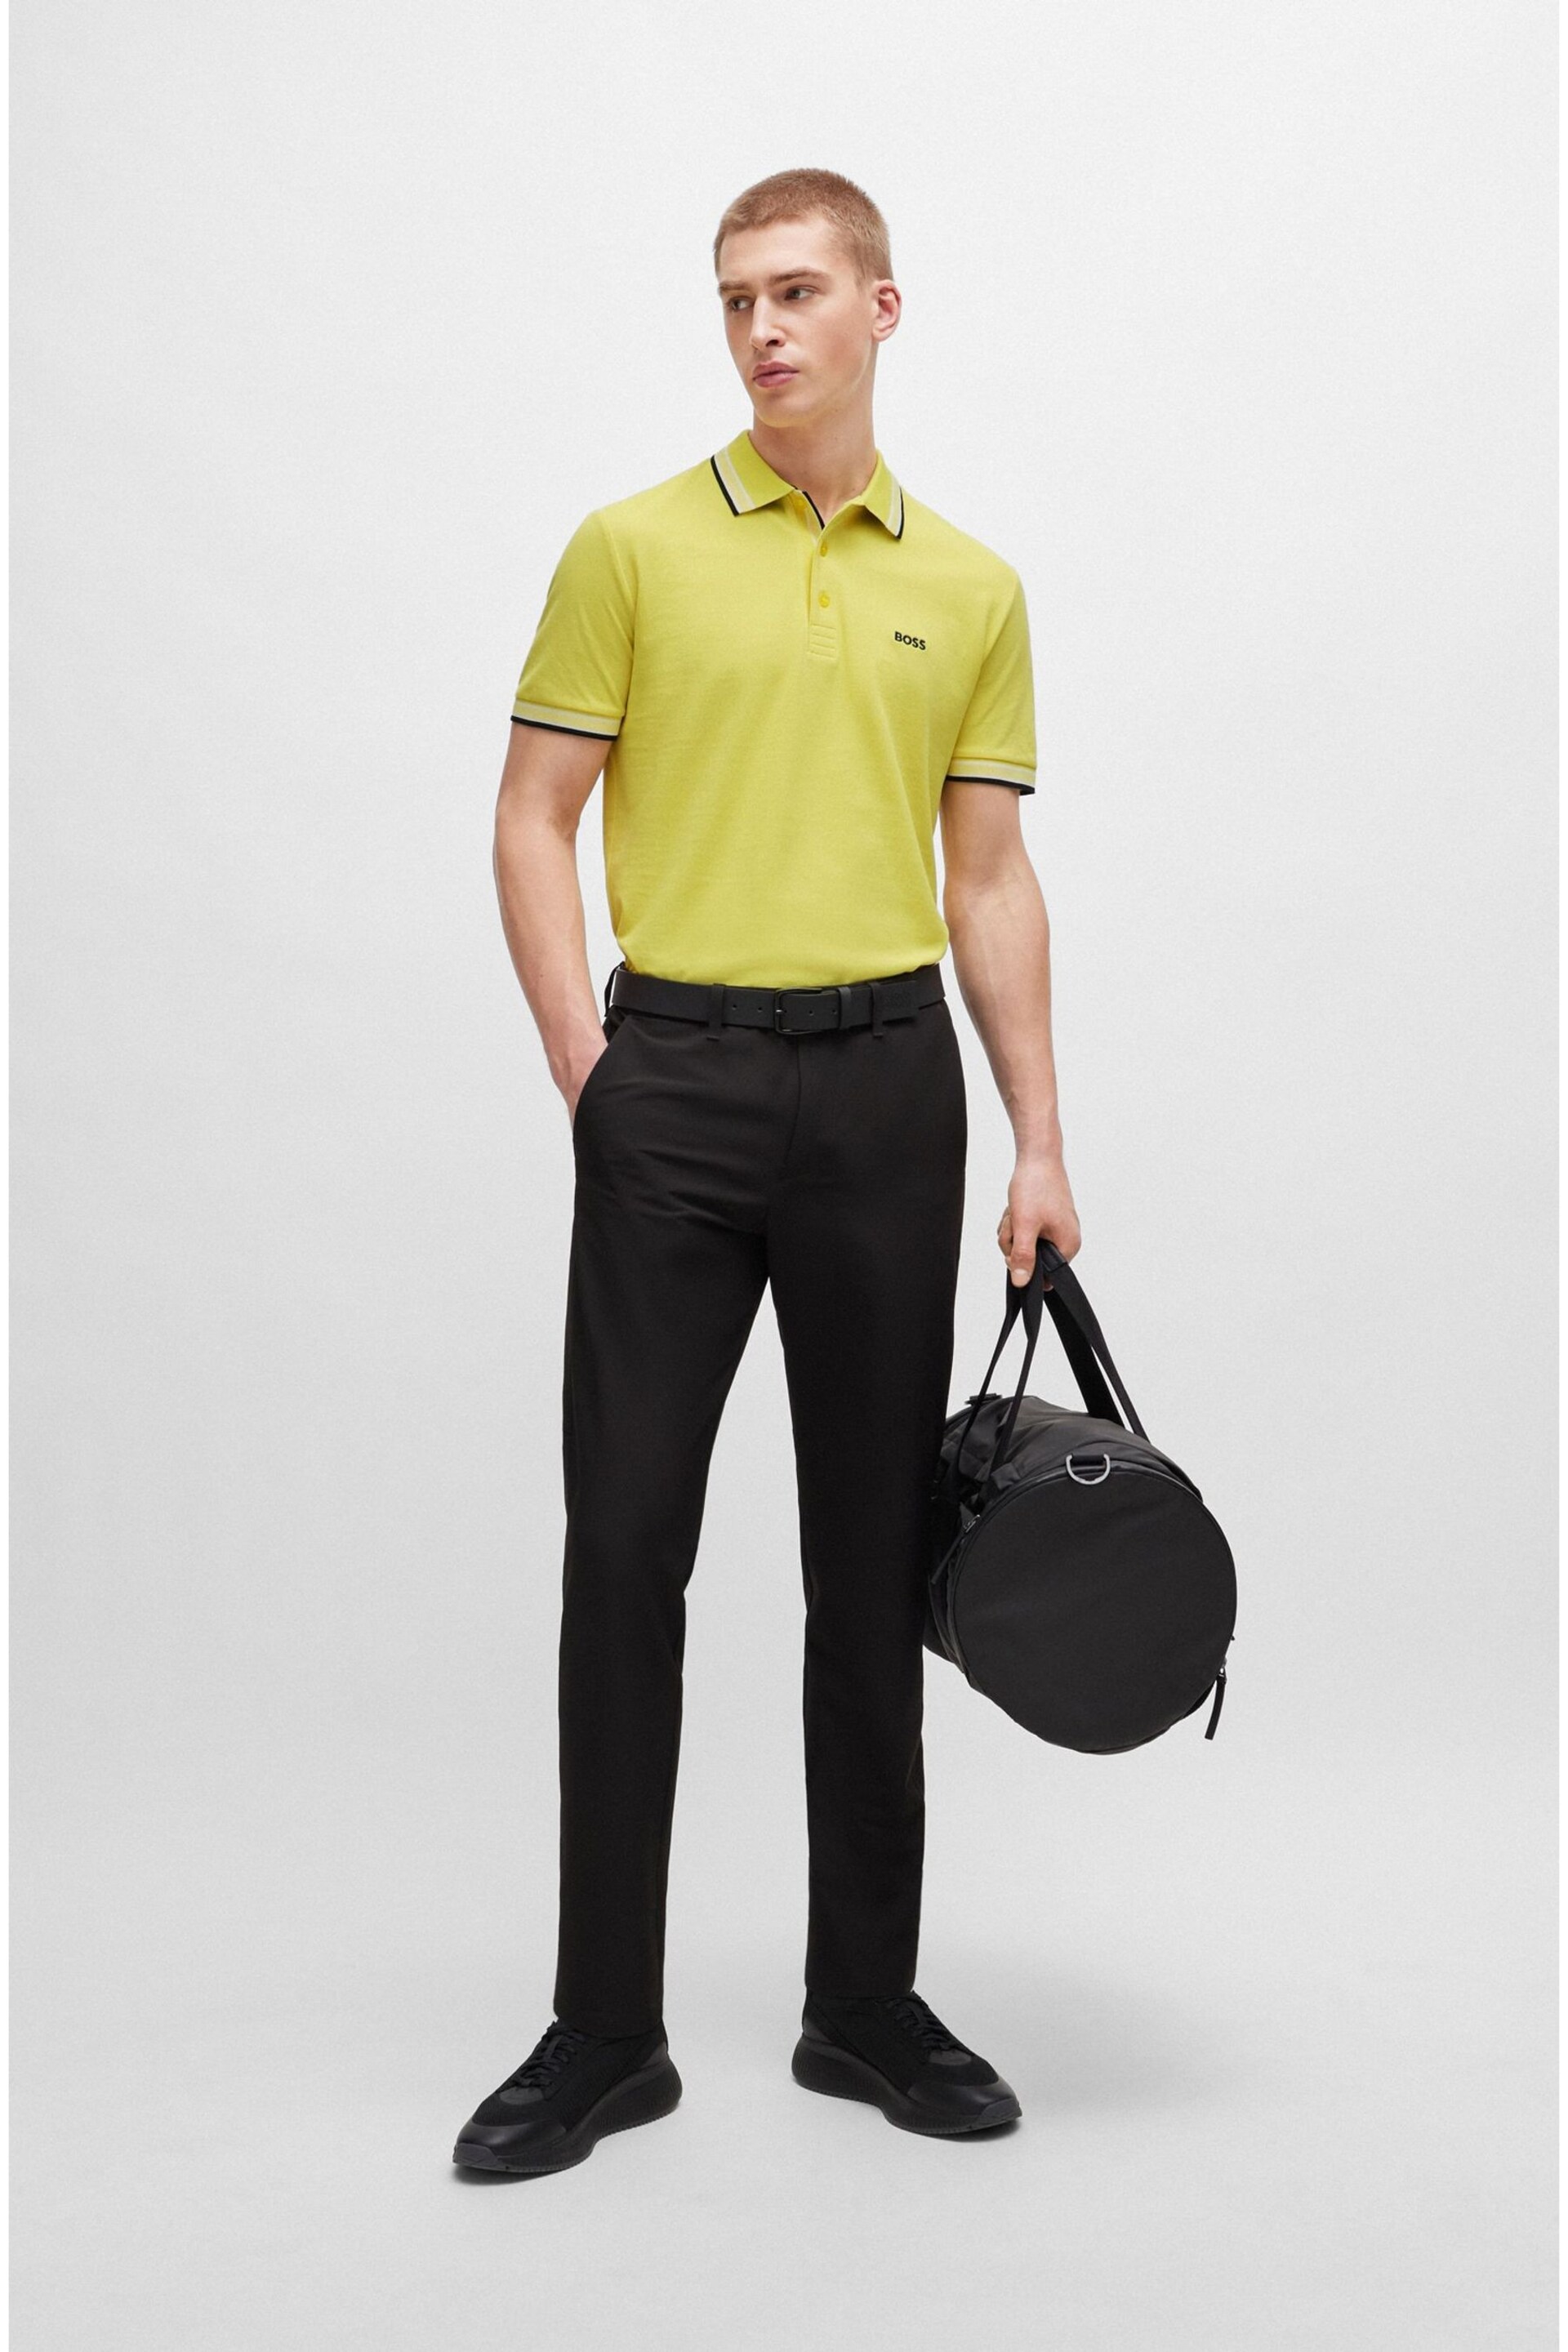 BOSS Yellow Cotton Polo Shirt With Contrast Logo Details - Image 4 of 5